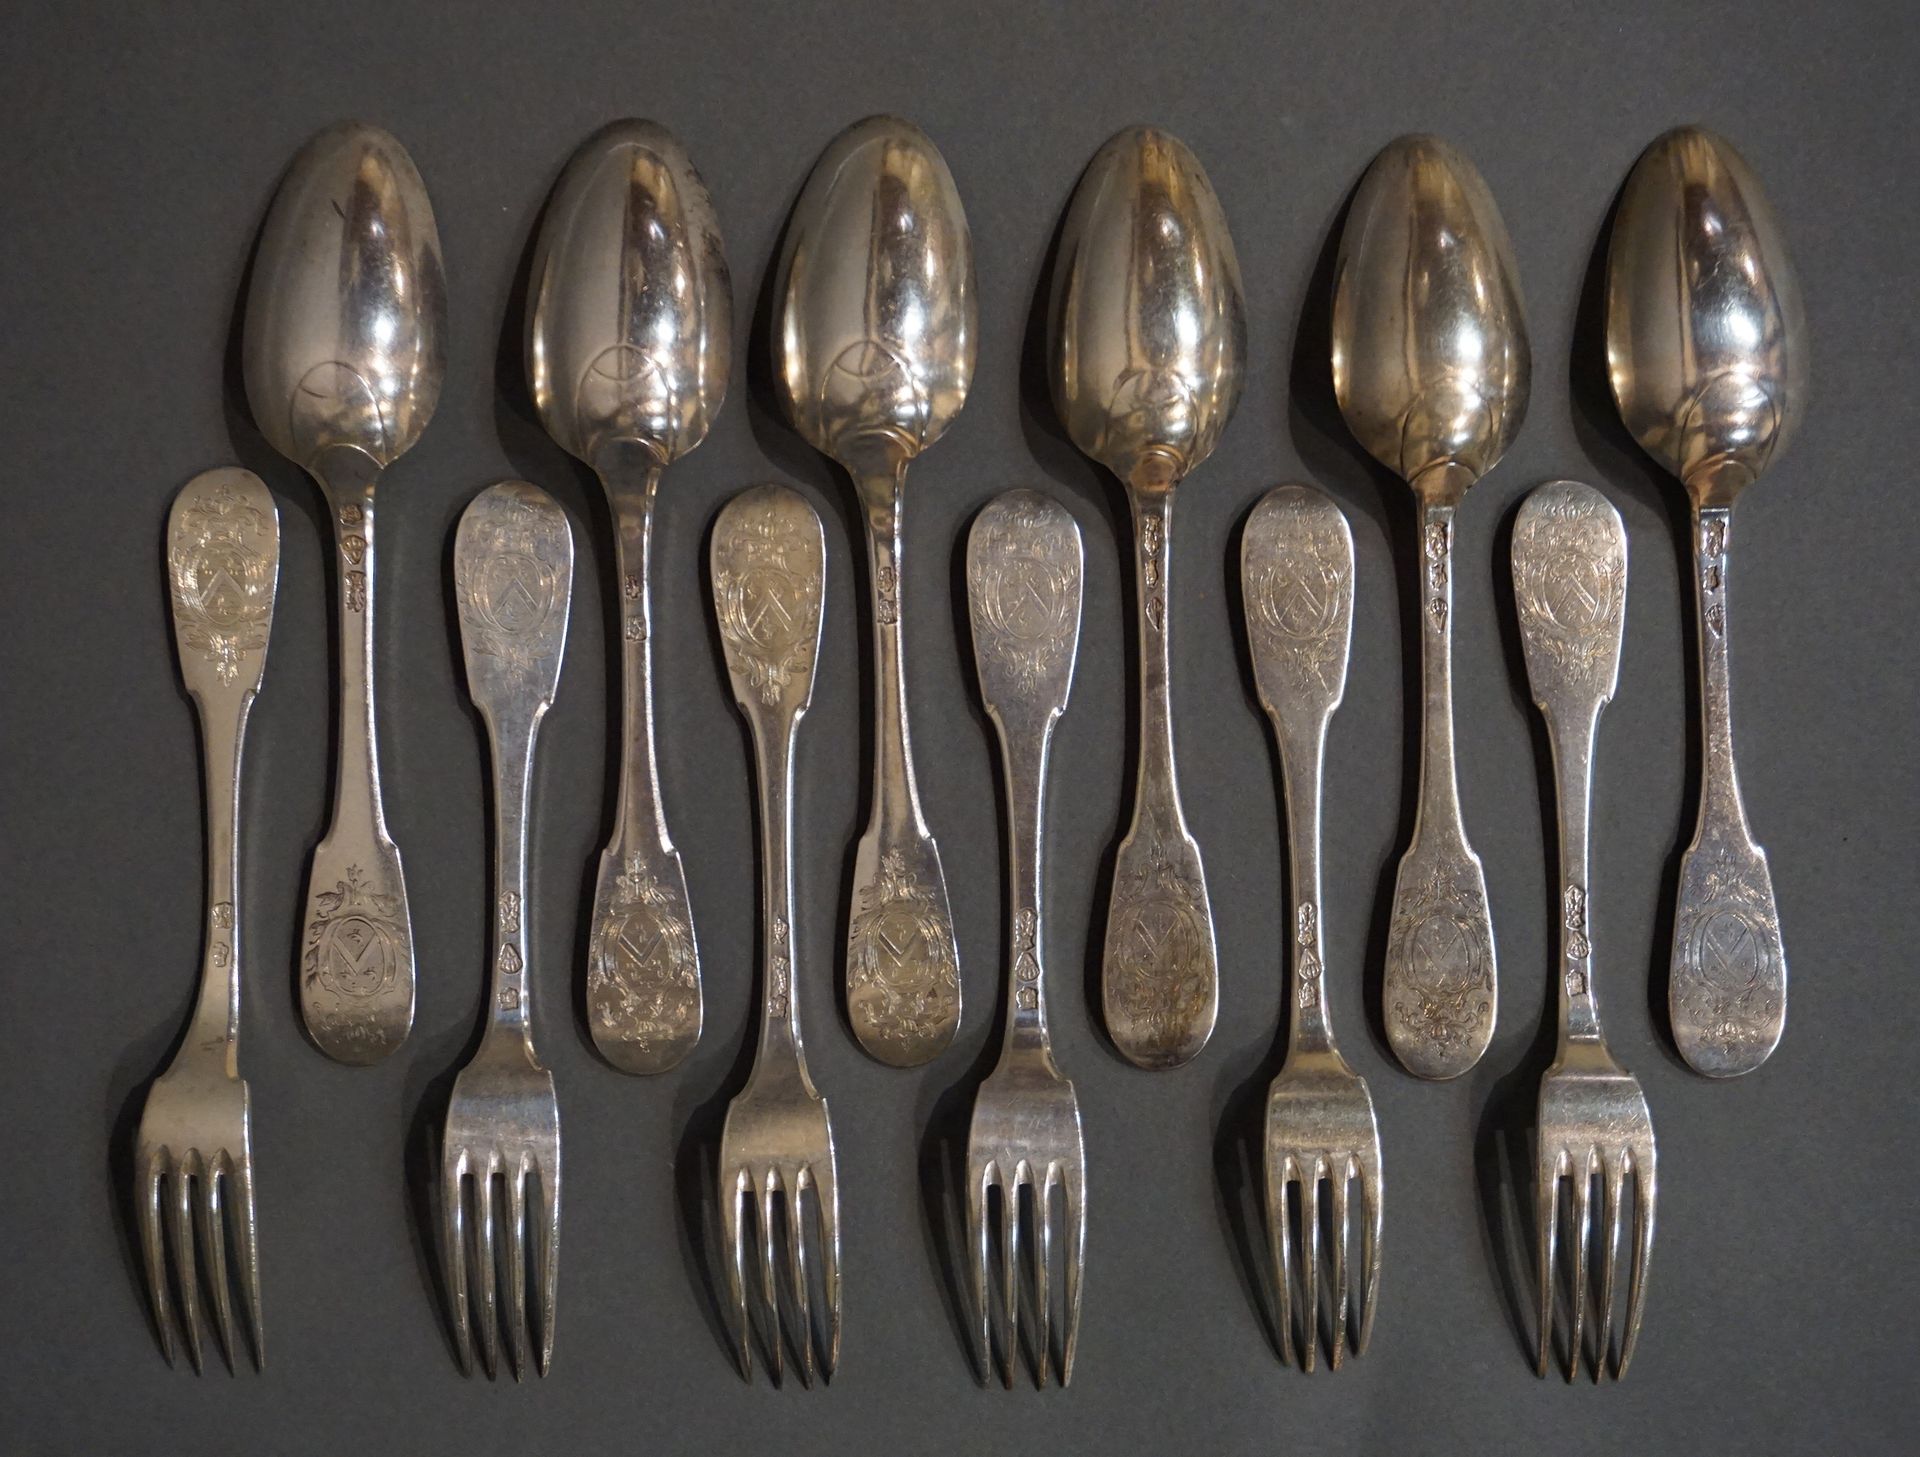 COUVERTS Six large spoons and six large forks in silver. 18th century (902 grs)